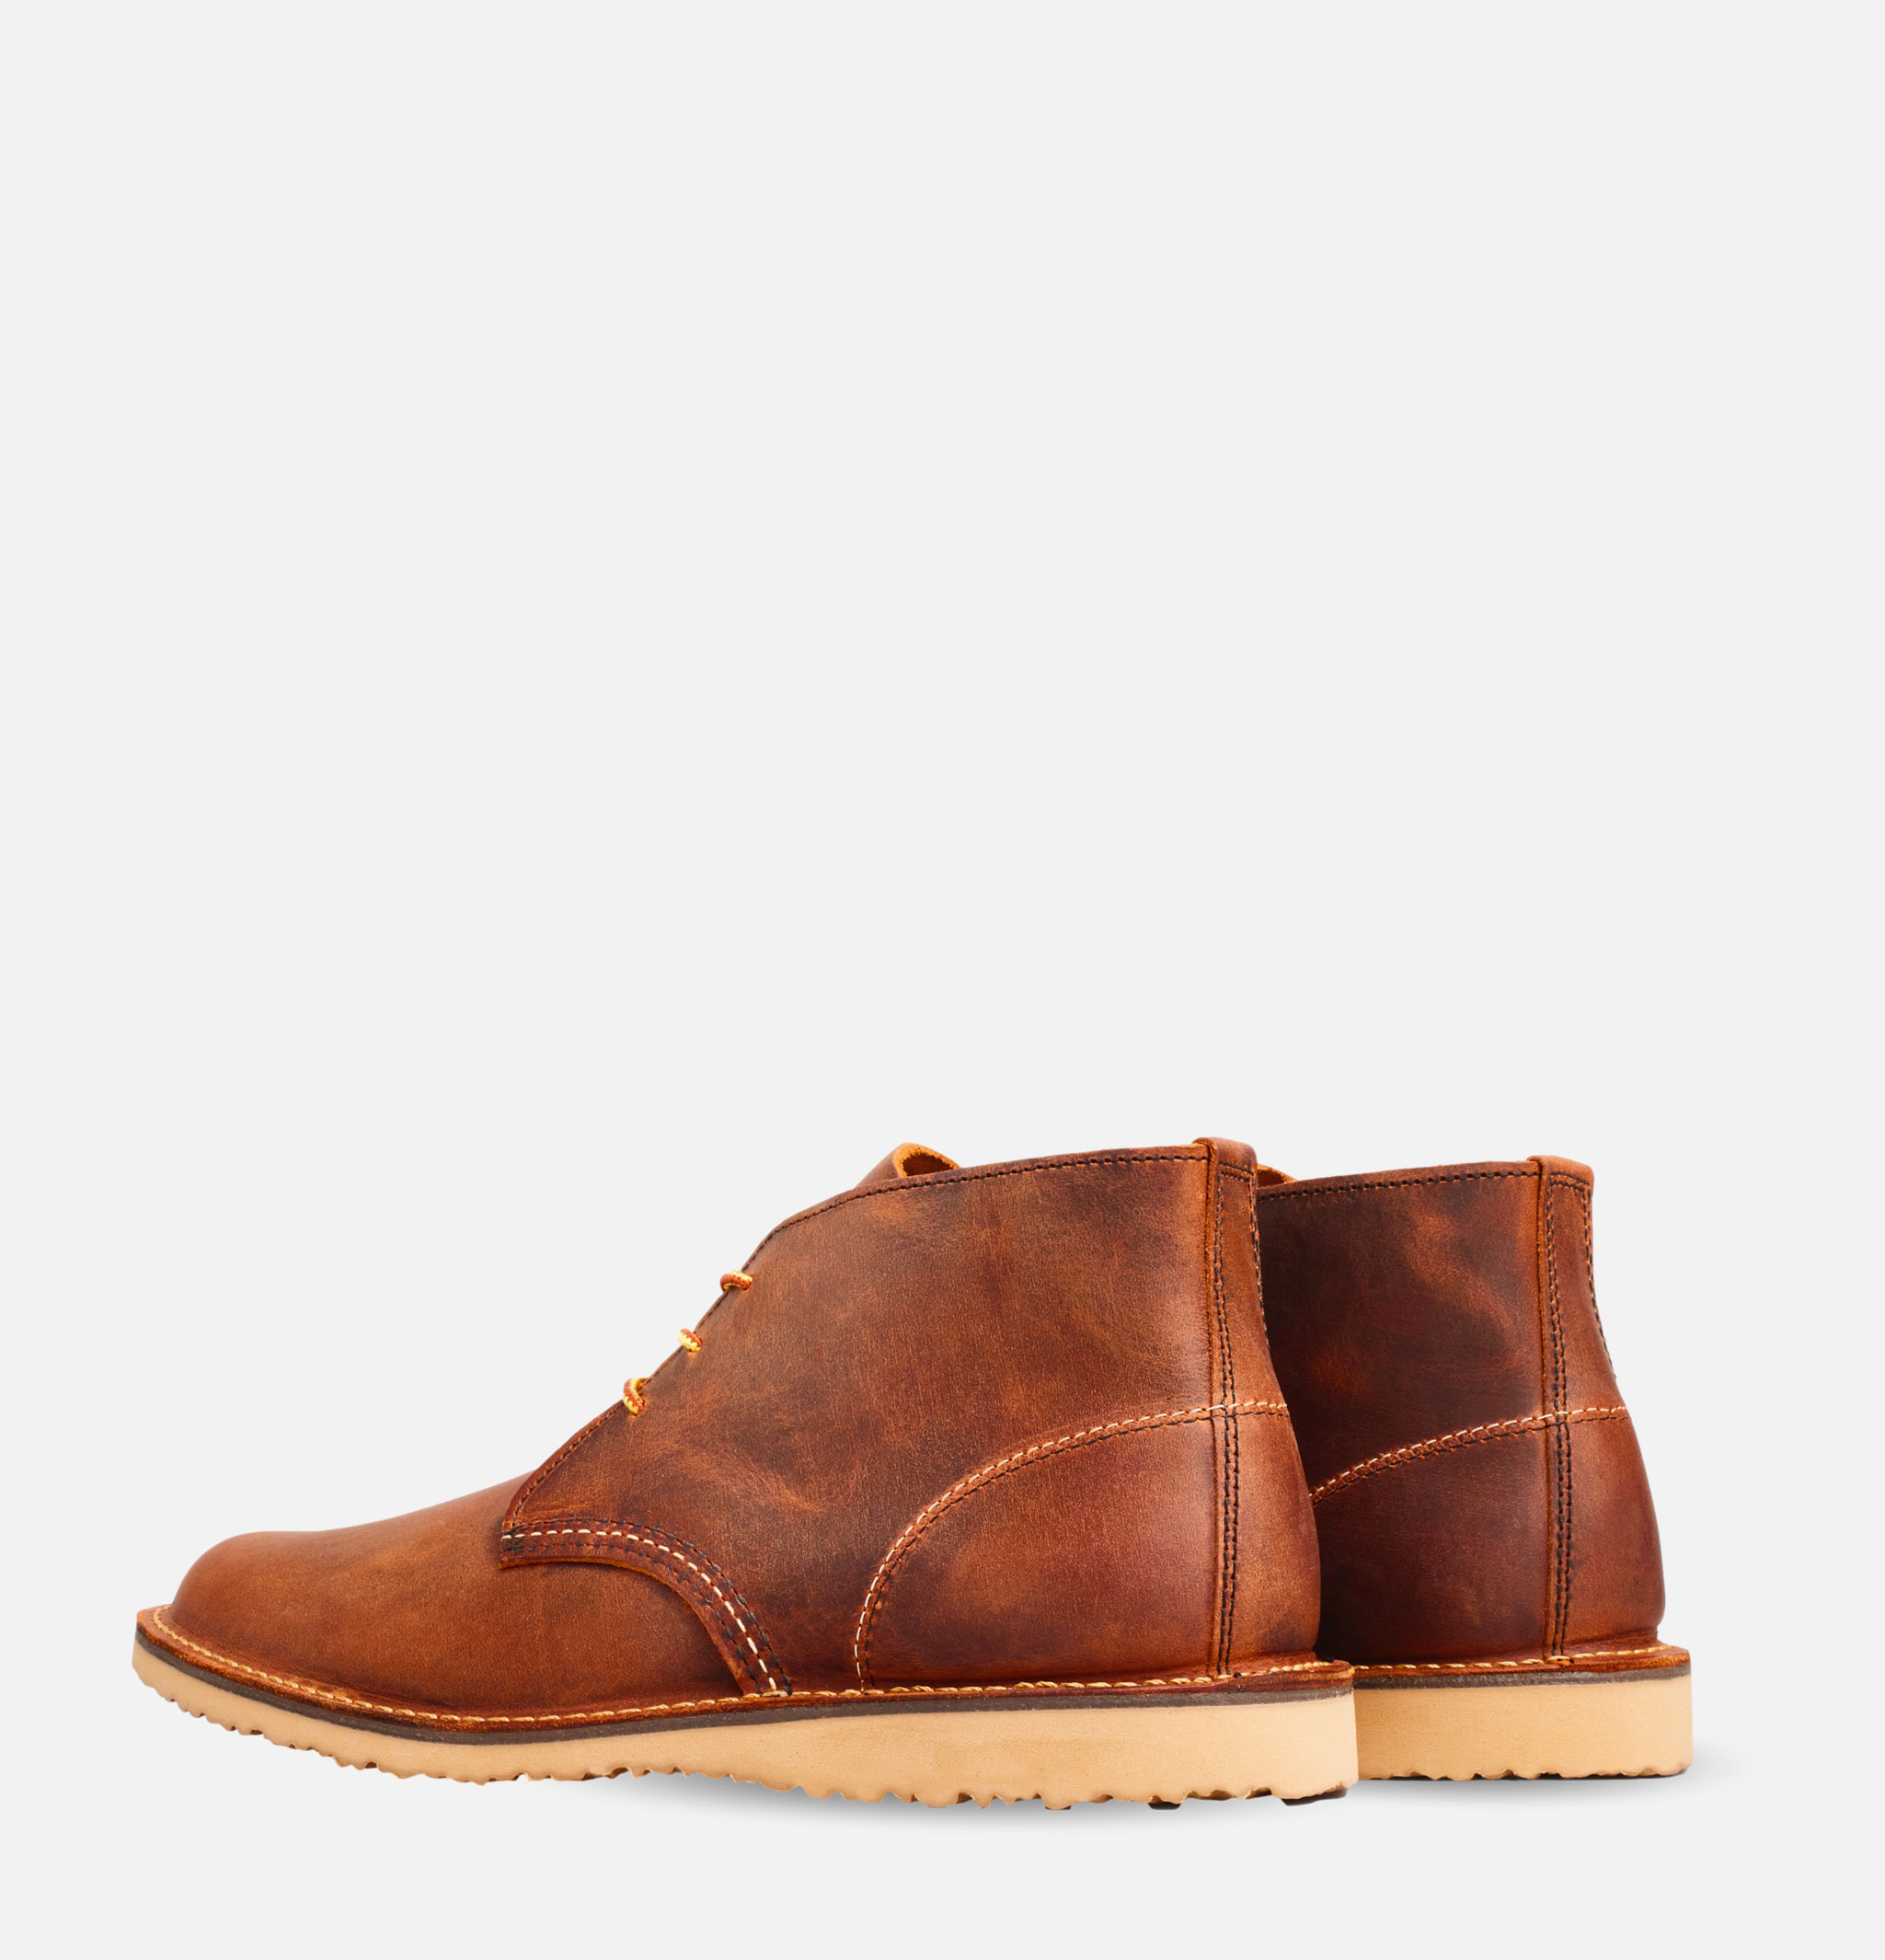 Red Wing Shoes - 3322 Weekender Chukka Copper Rough